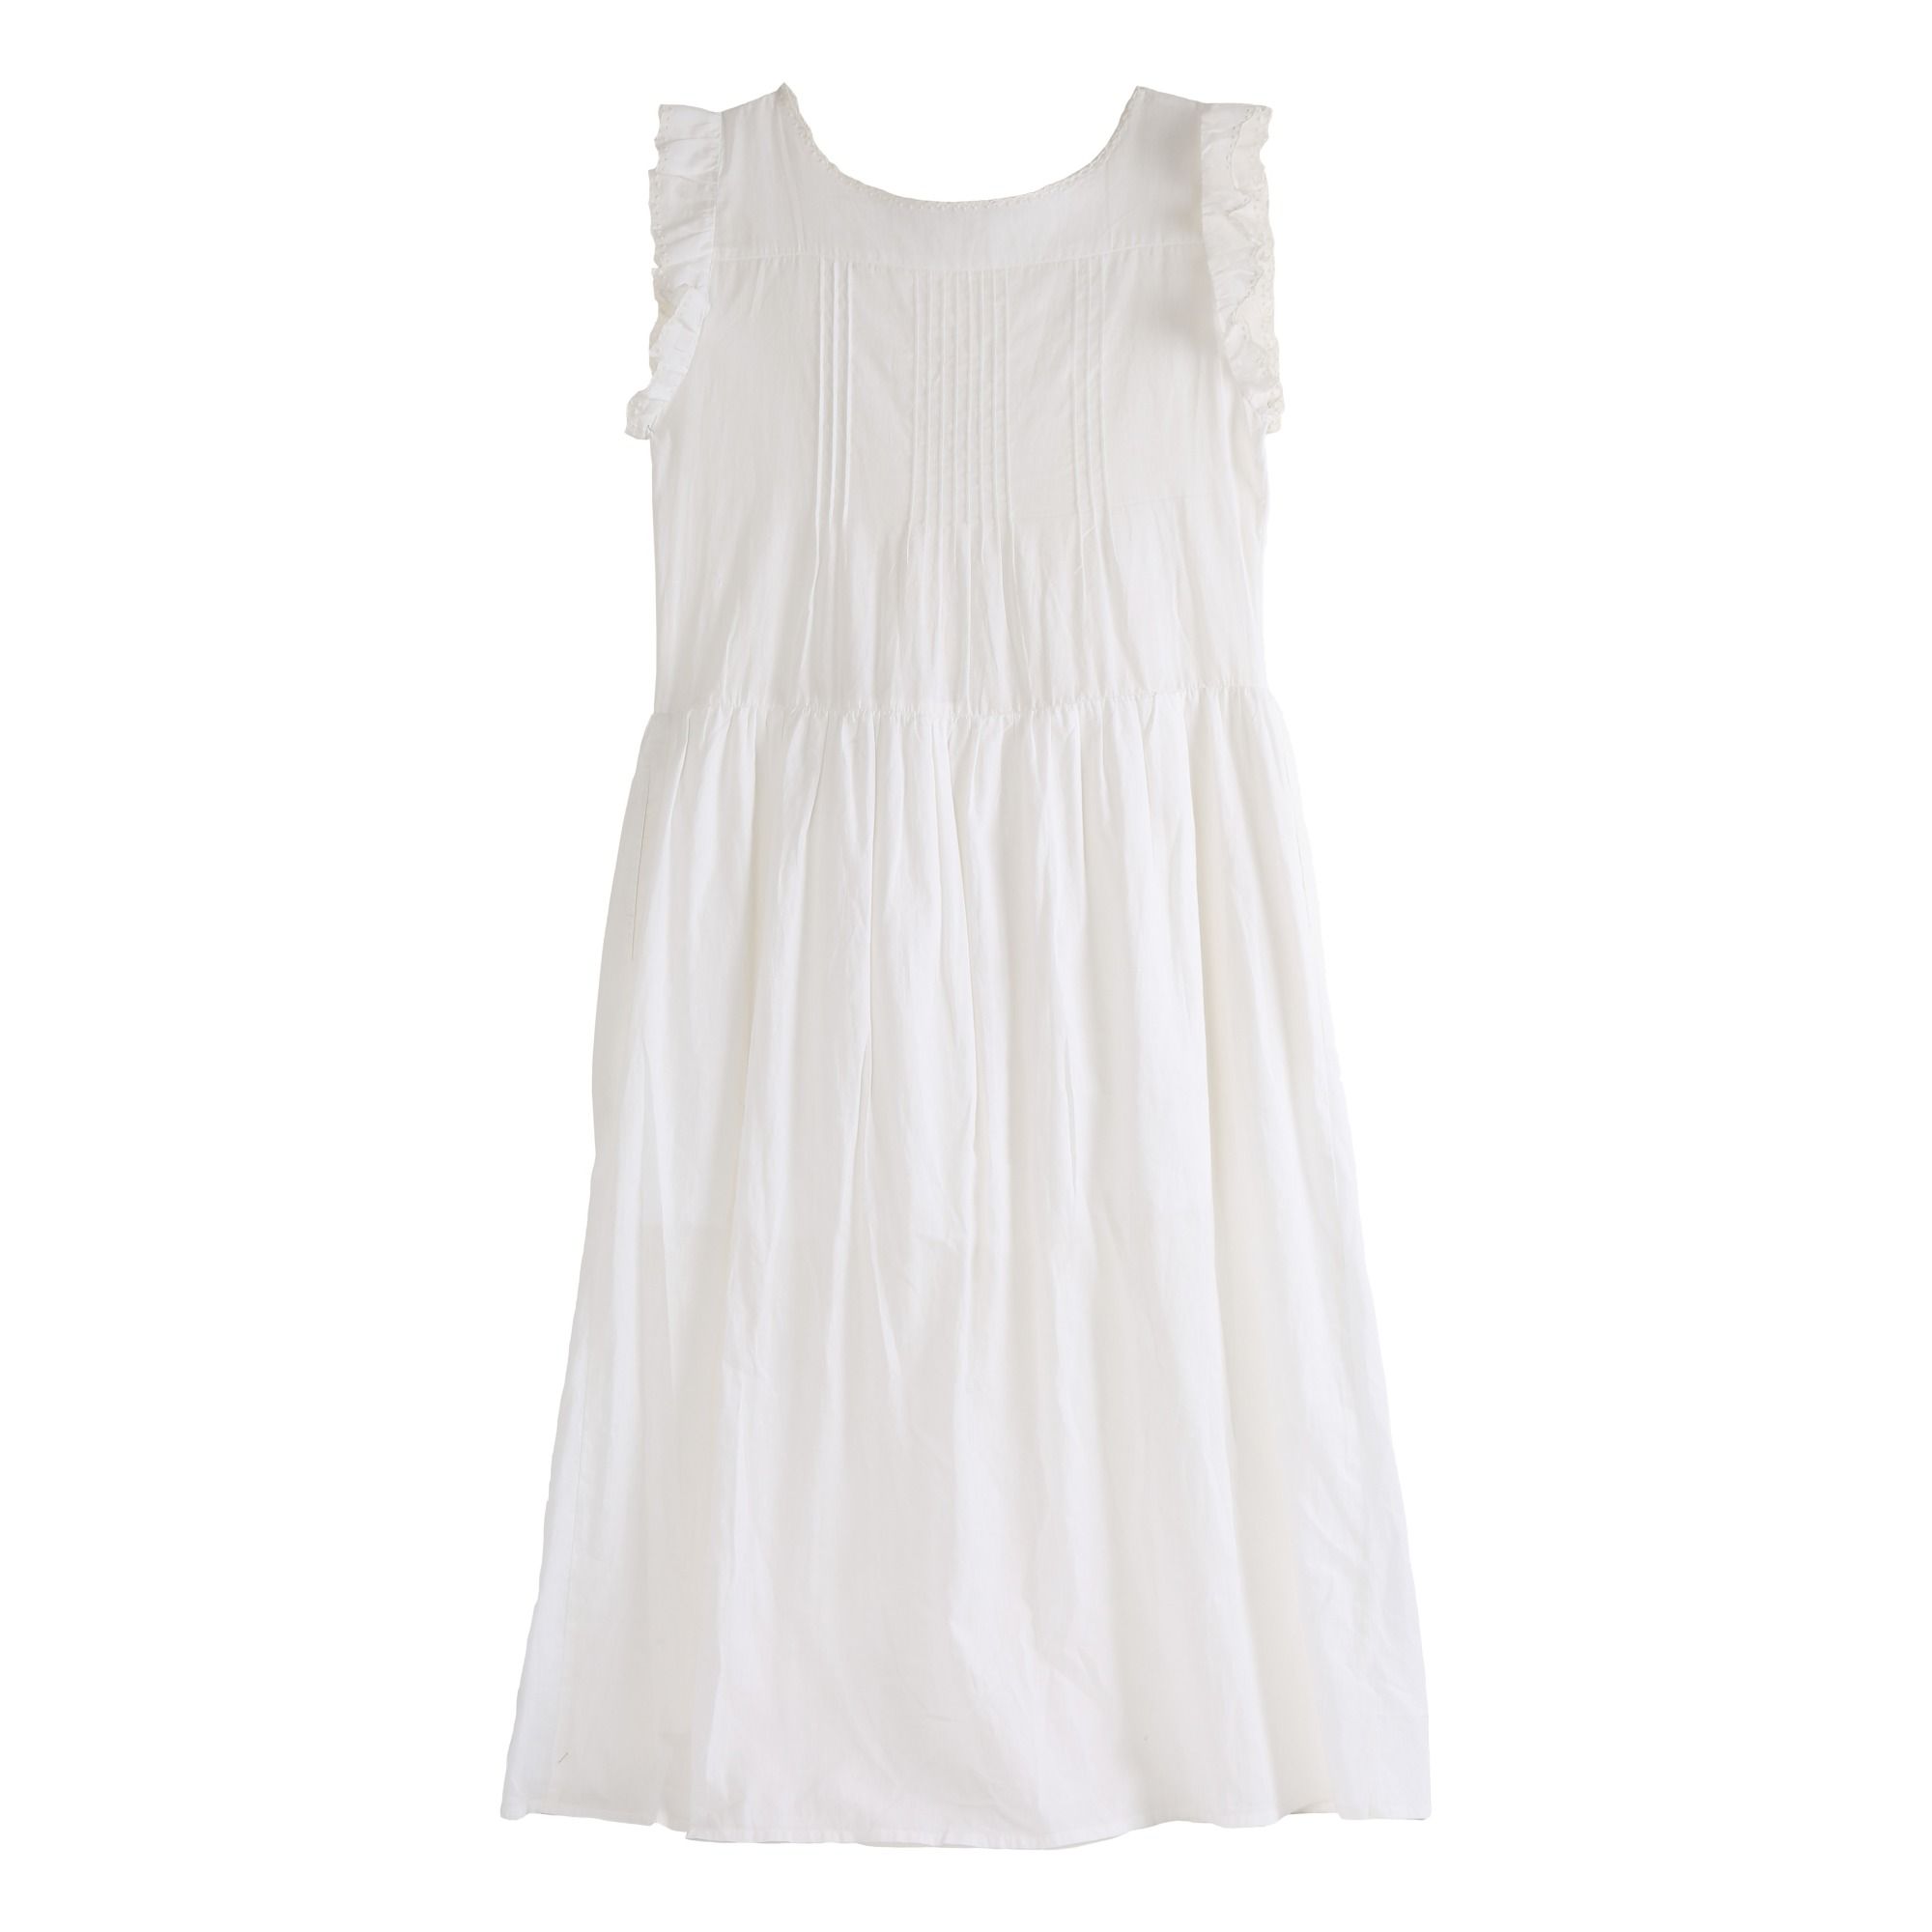 Embroidered Dress - Women's Collection - White Emile et Ida